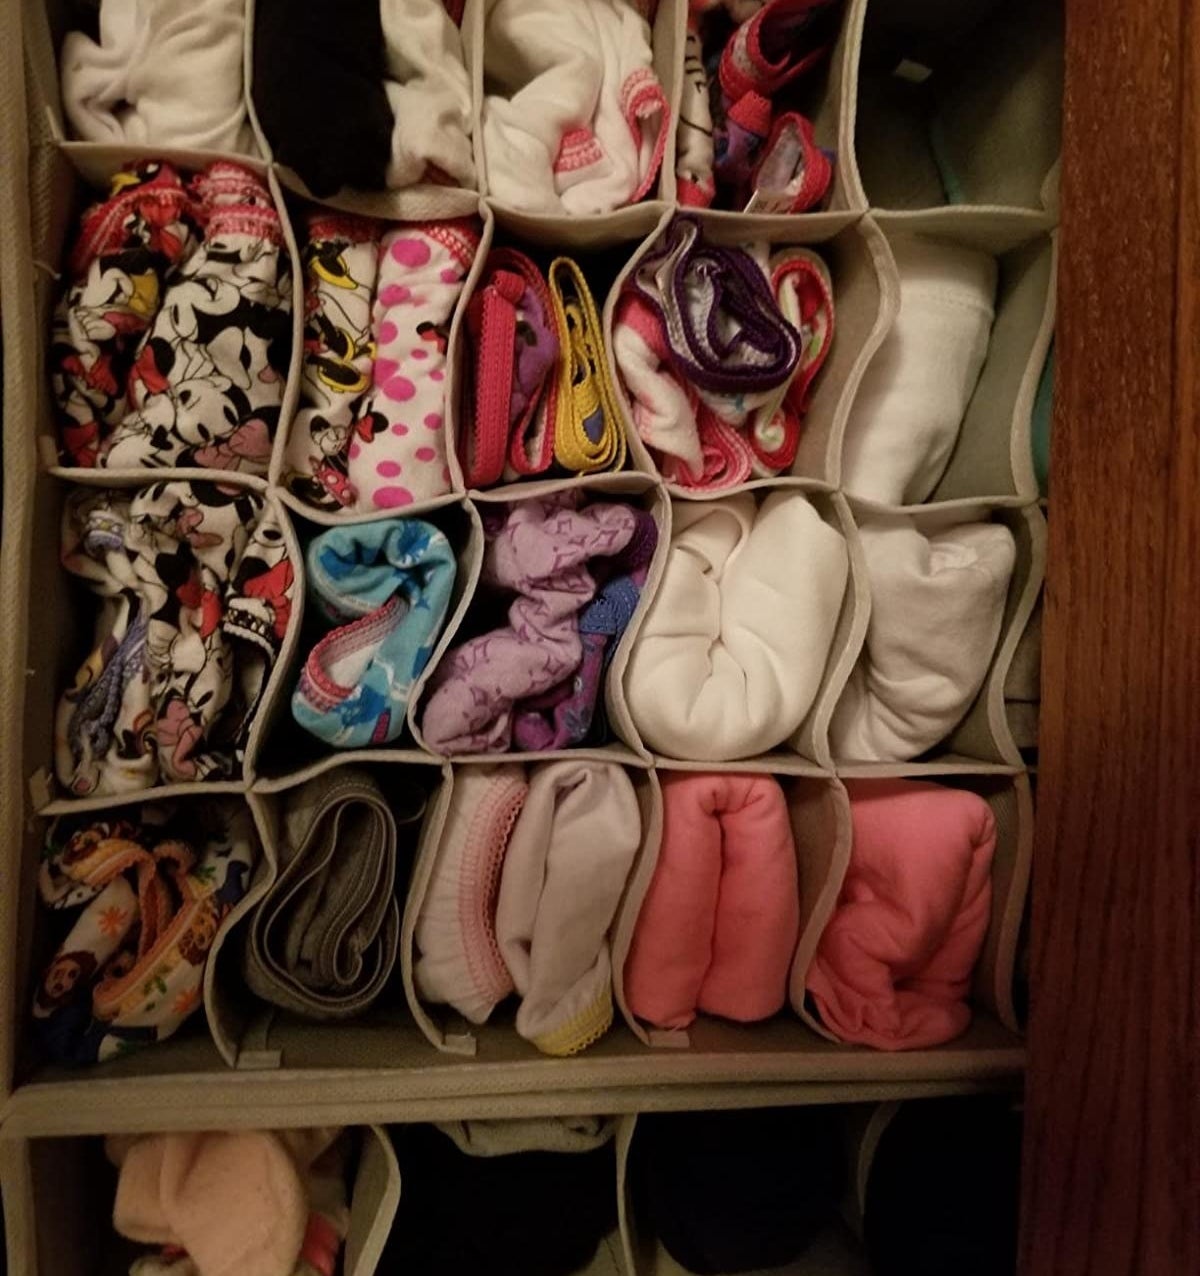 Reviewer&#x27;s photo showing their child&#x27;s underwear and pajamas neatly organized in the drawer